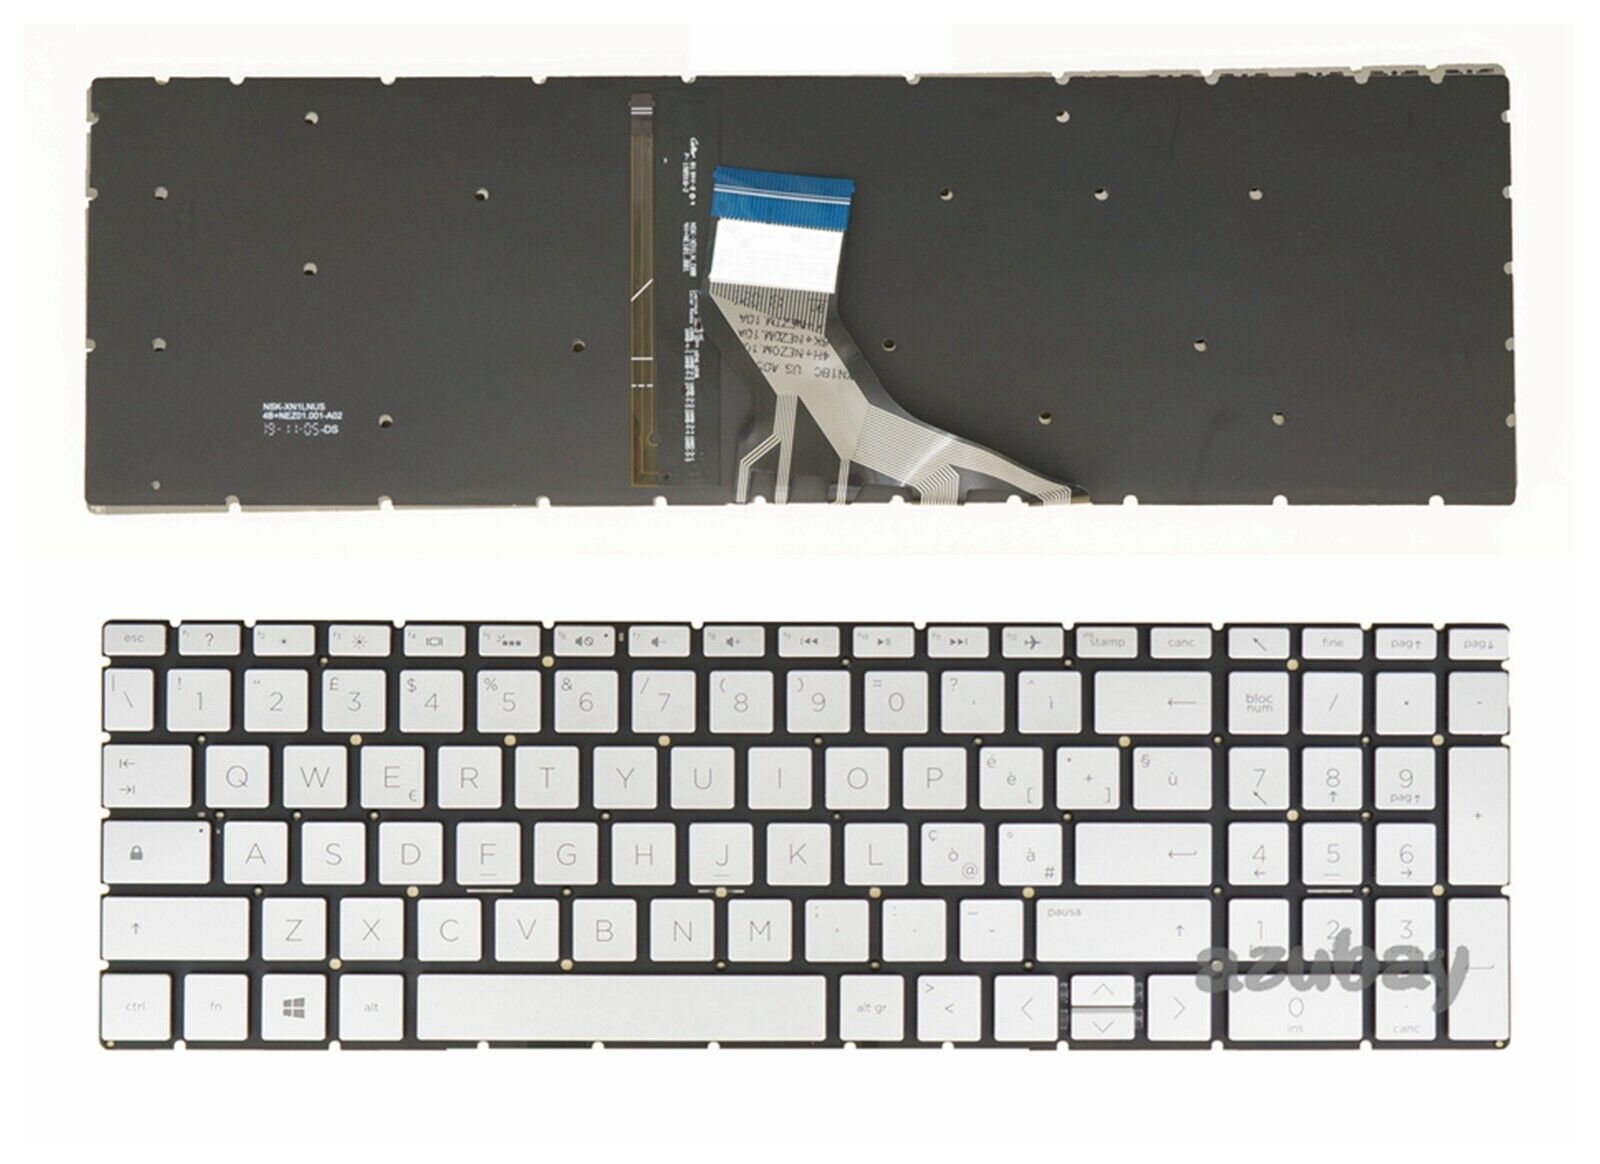 Keyboard For HP 15-cn0000 15m-cn0000 15-cp0000 15m-cp0000 15m-dr0000 15m-ds0000